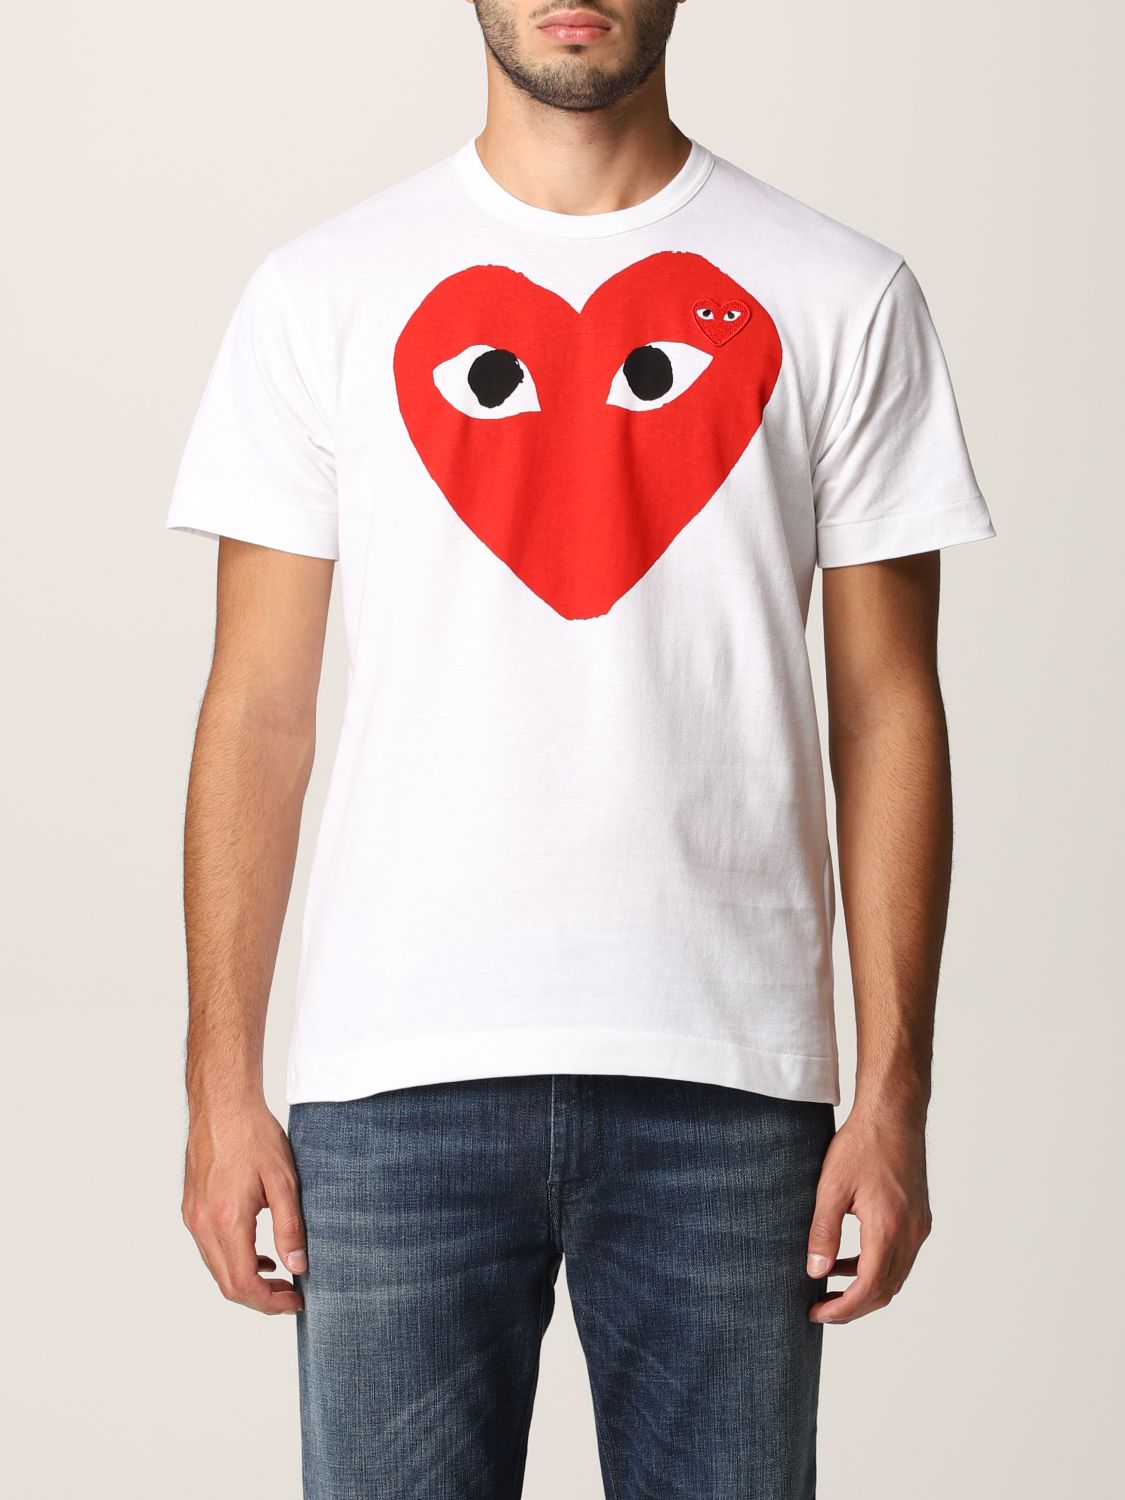 COMME DES GARCONS PLAY: T-shirt homme | T-Shirt Comme Des Garcons Play Homme Blanc | T-Shirt Des Play P1T026 GIGLIO.COM